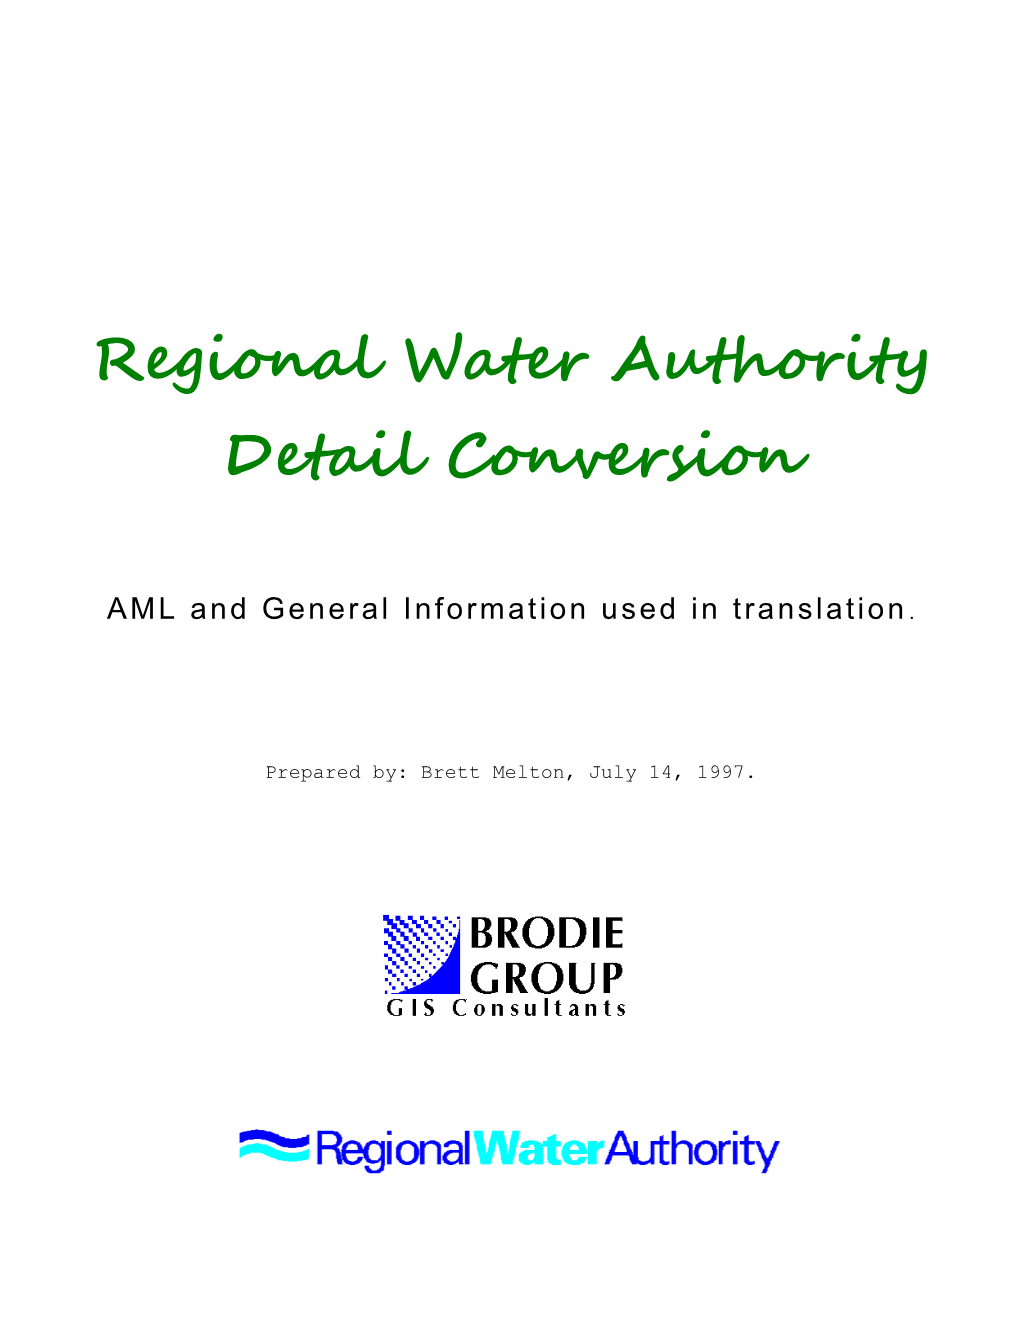 Regional Water Authority DETAIL Conversion